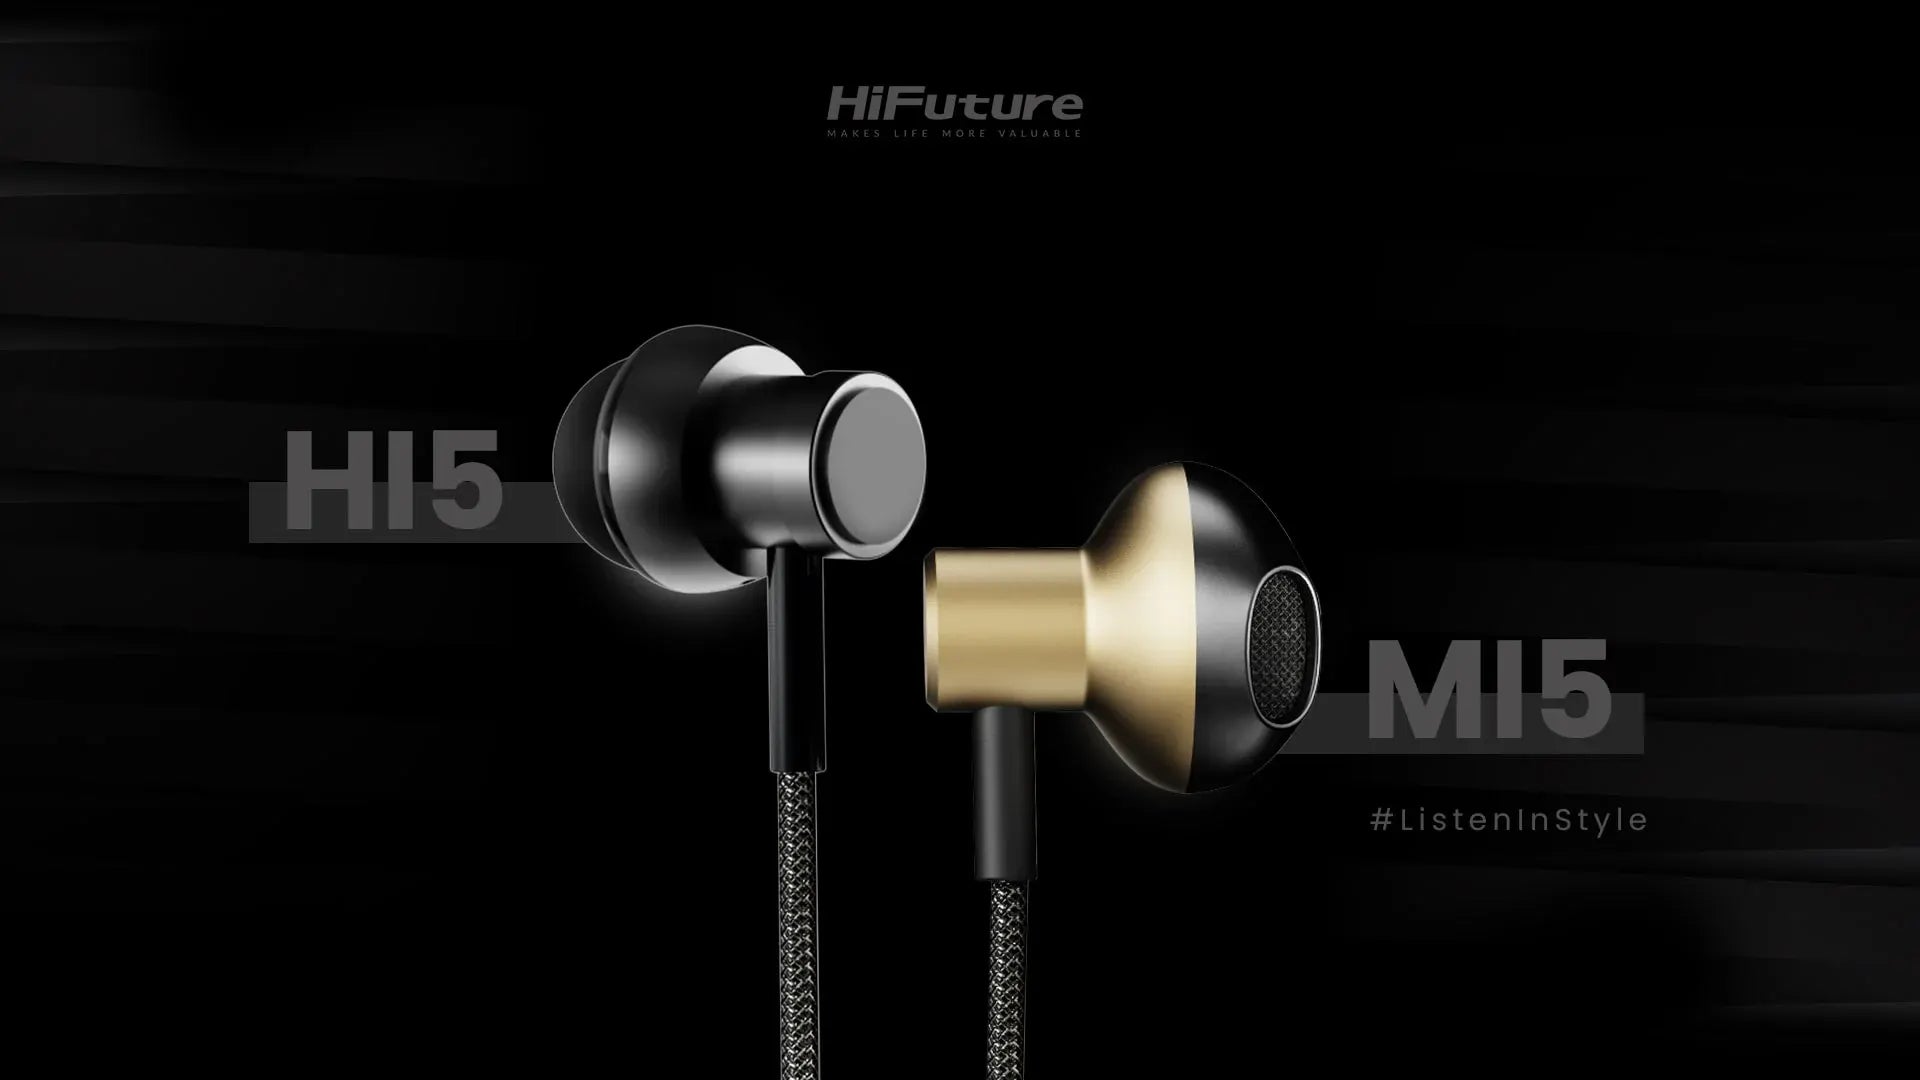 5 Things to Know About HiFuture’s HI5 & MI5 Wired Headphones